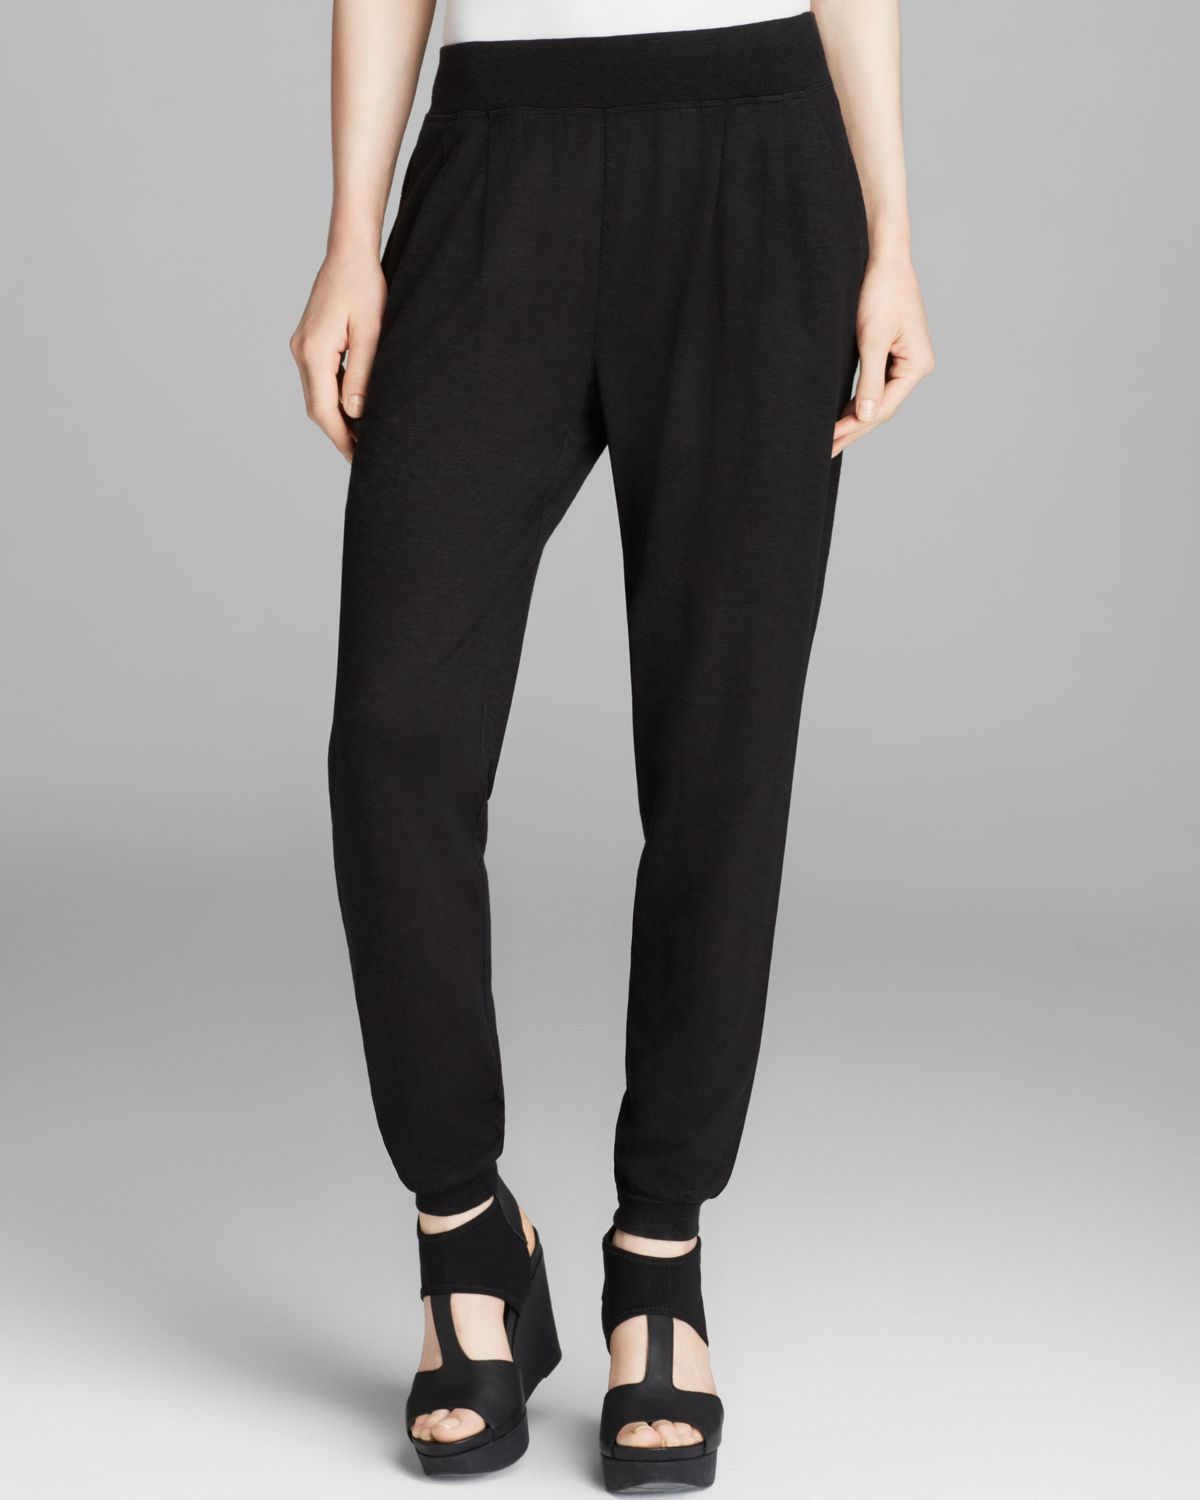 Eileen Fisher Pleated Ankle Cuff Pants in Black - Lyst